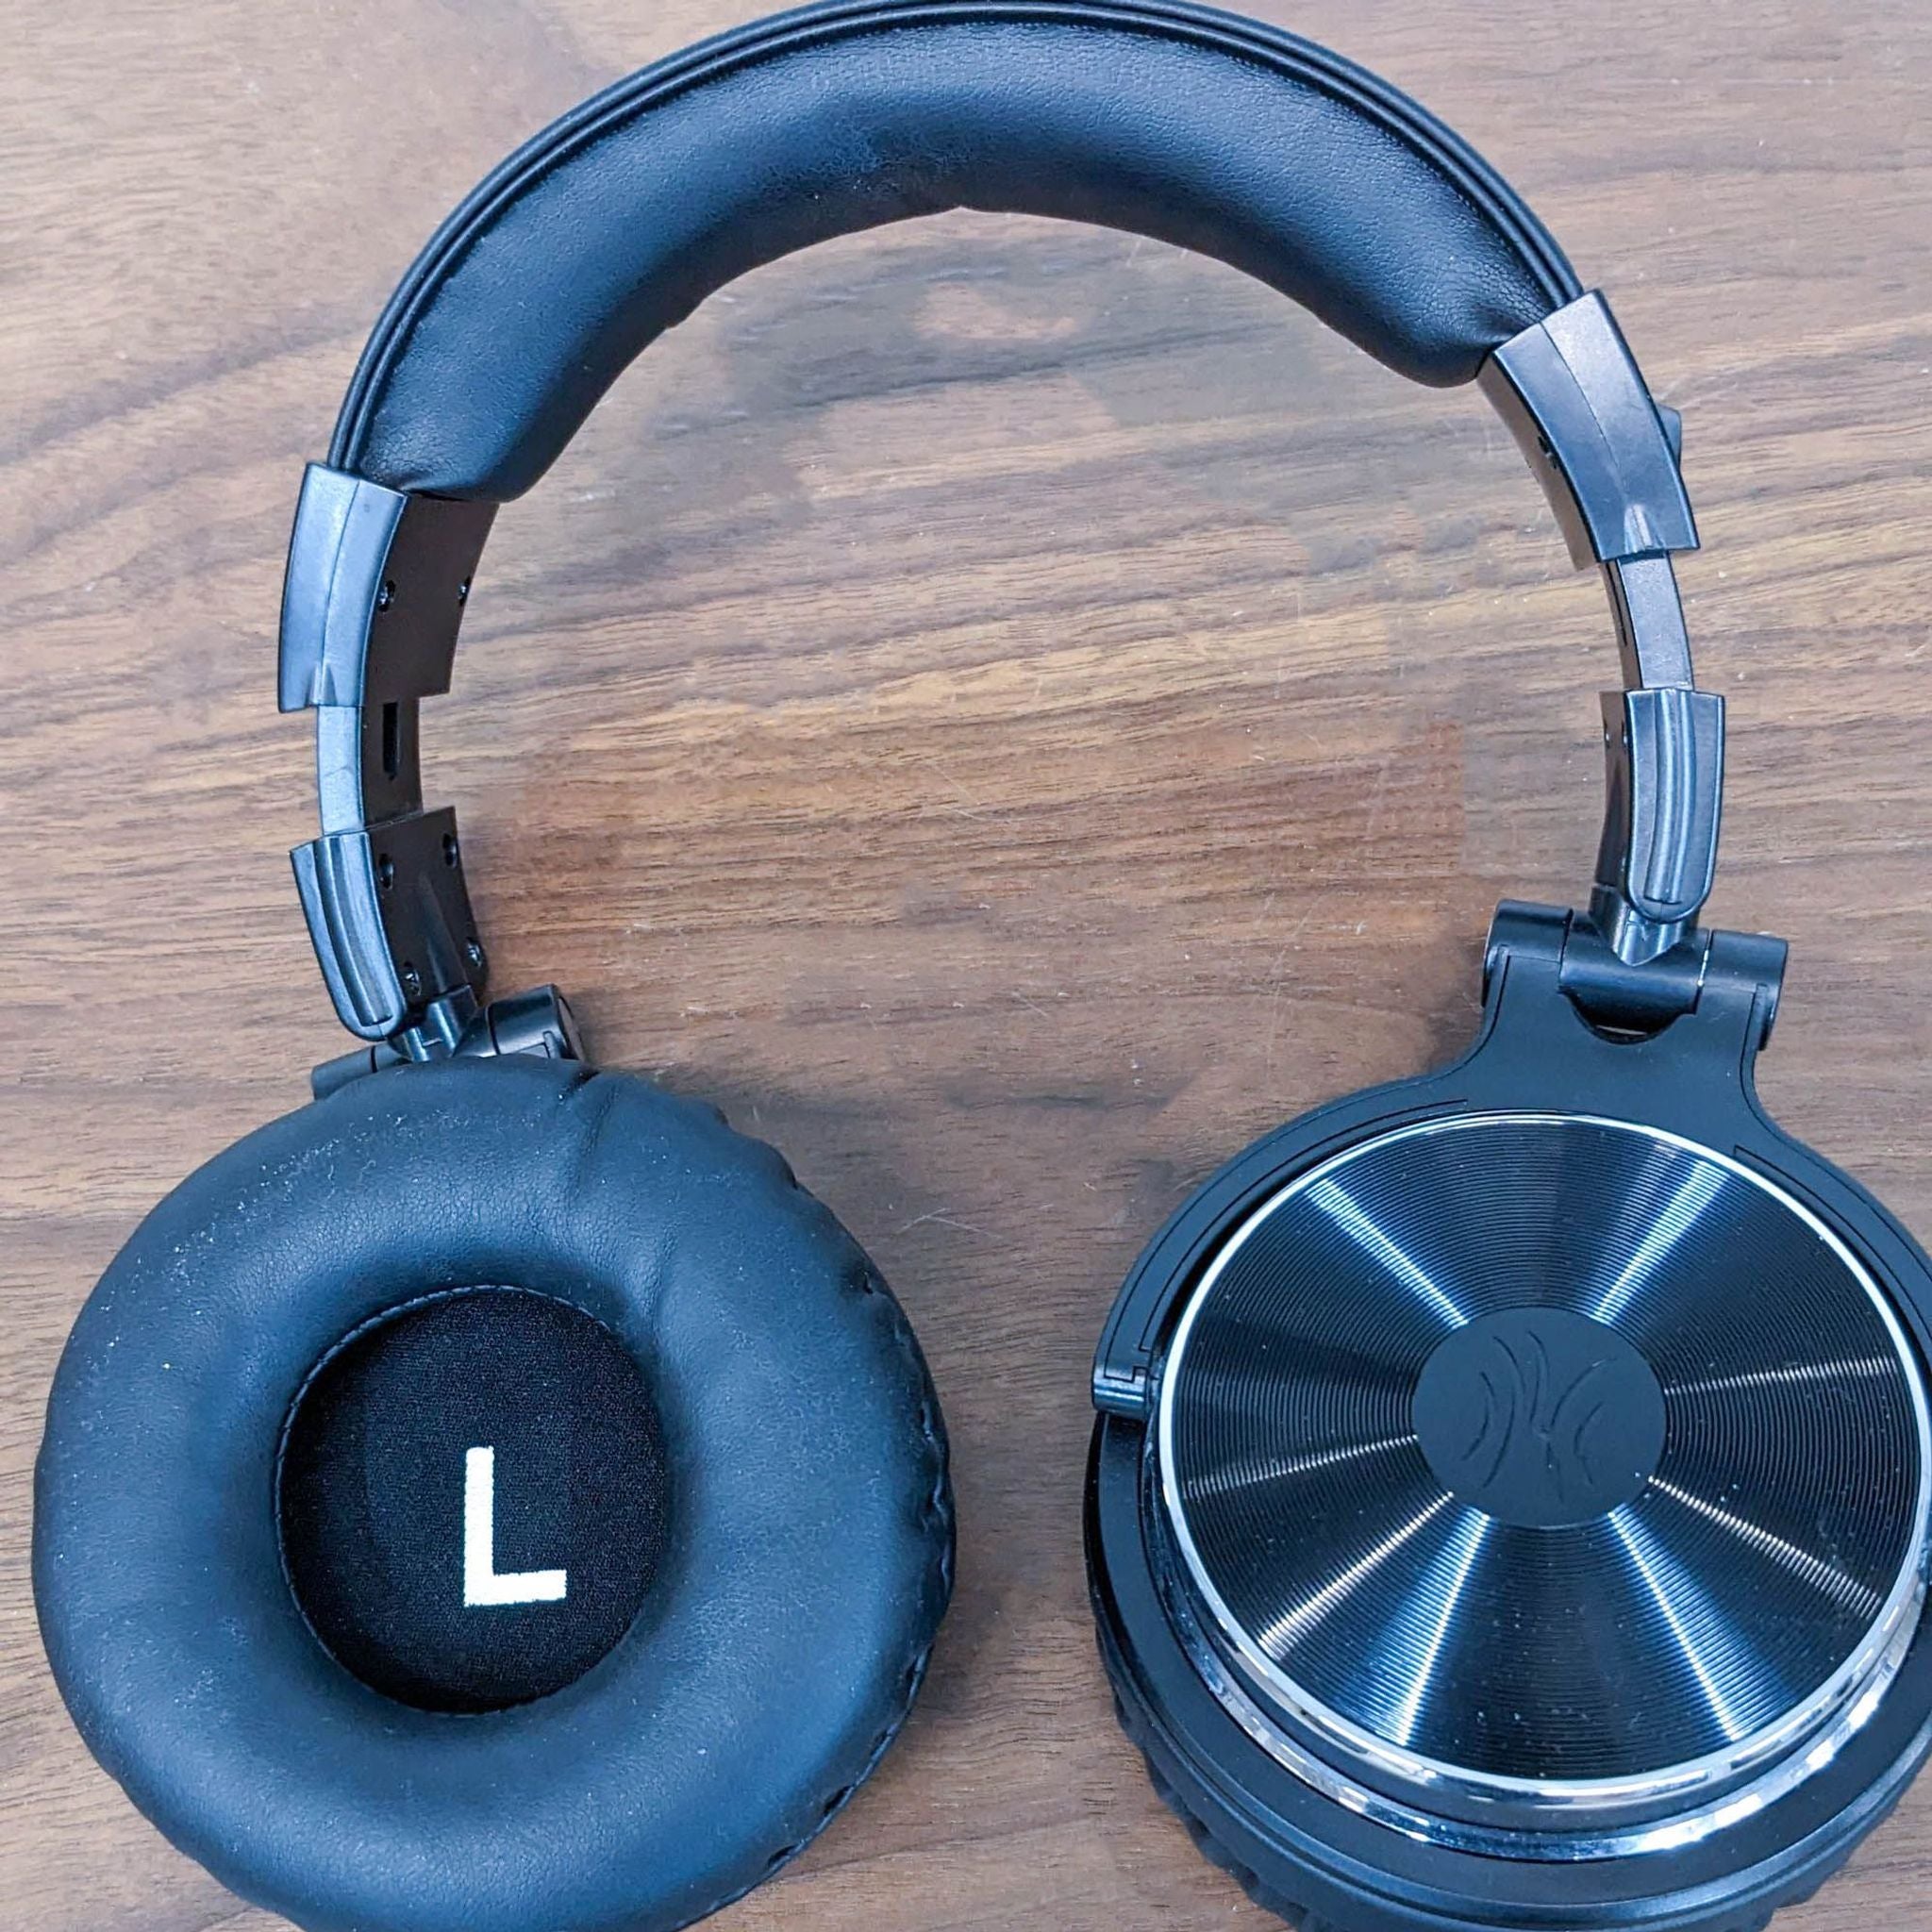 Professional OneOdio headphones with flexible headband and rotatable ear cups, showing left side indicator.